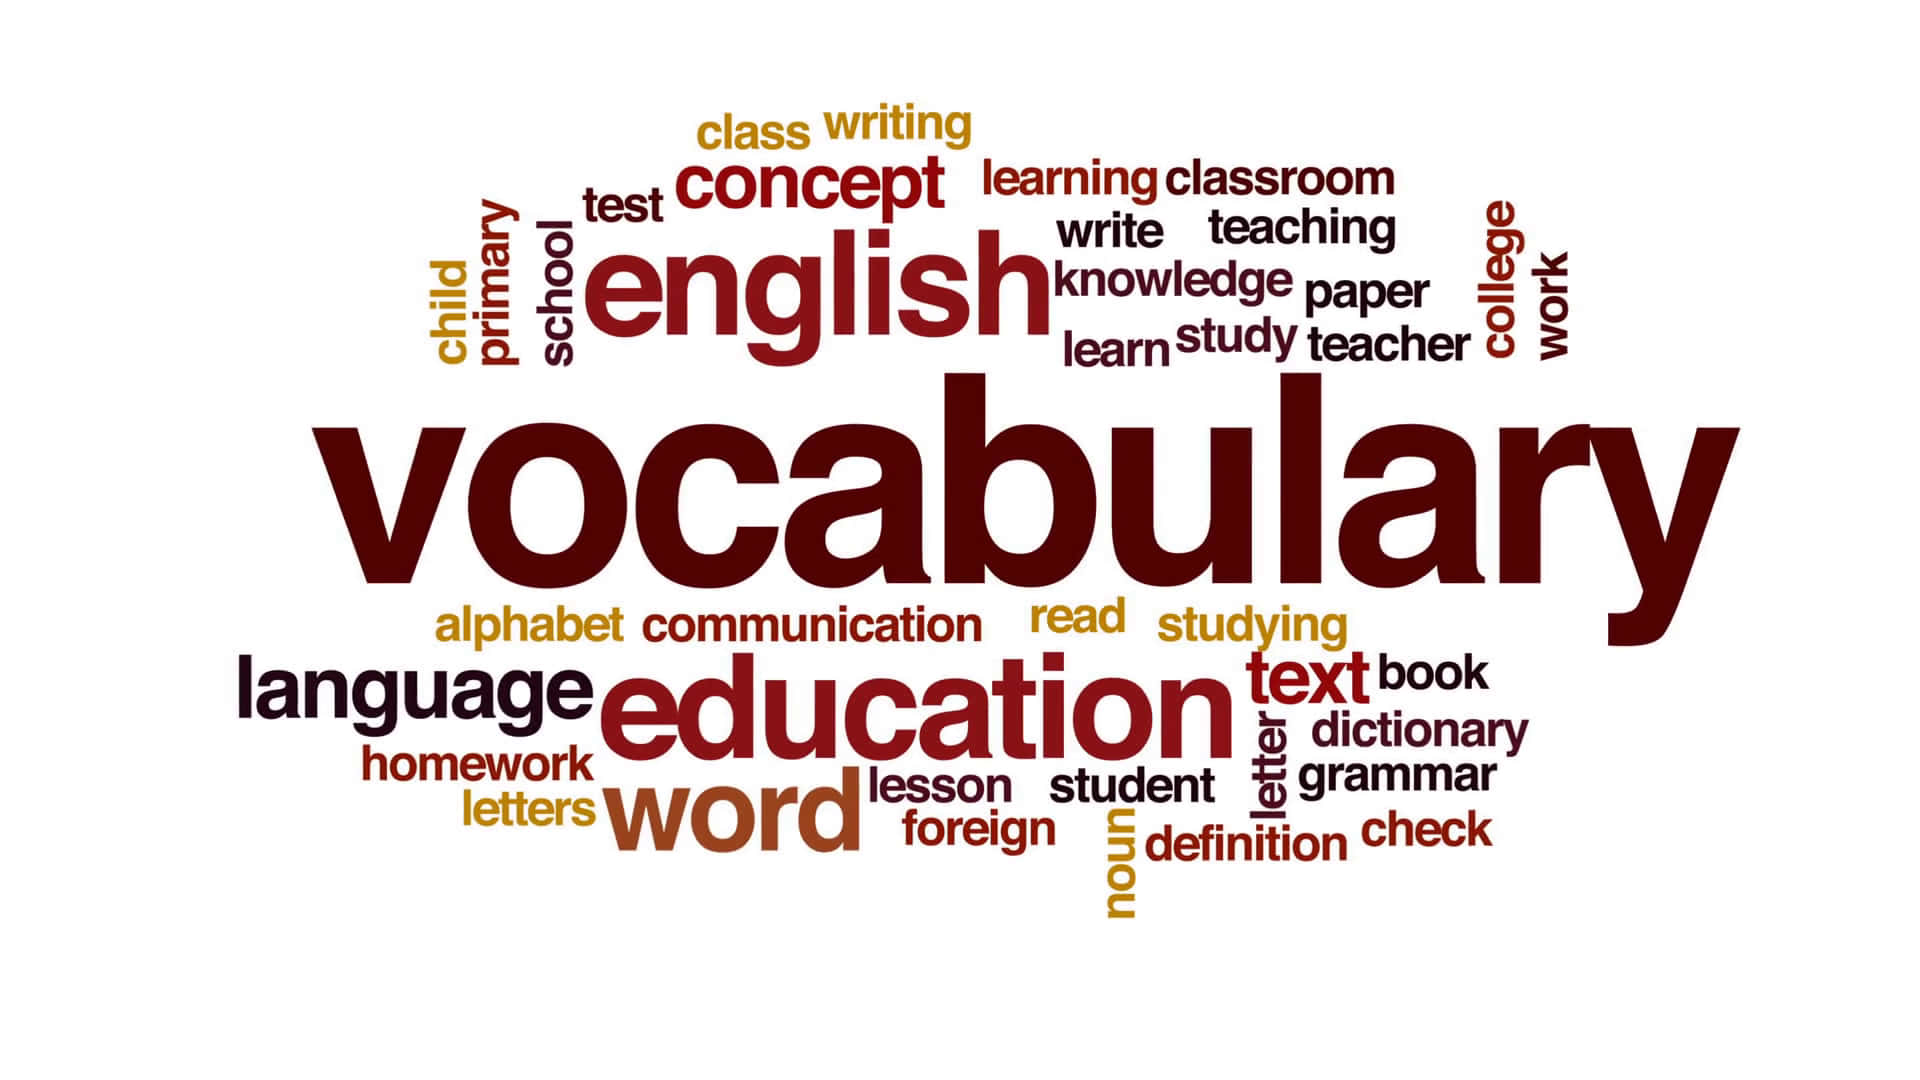 Strengthen your vocab knowledge